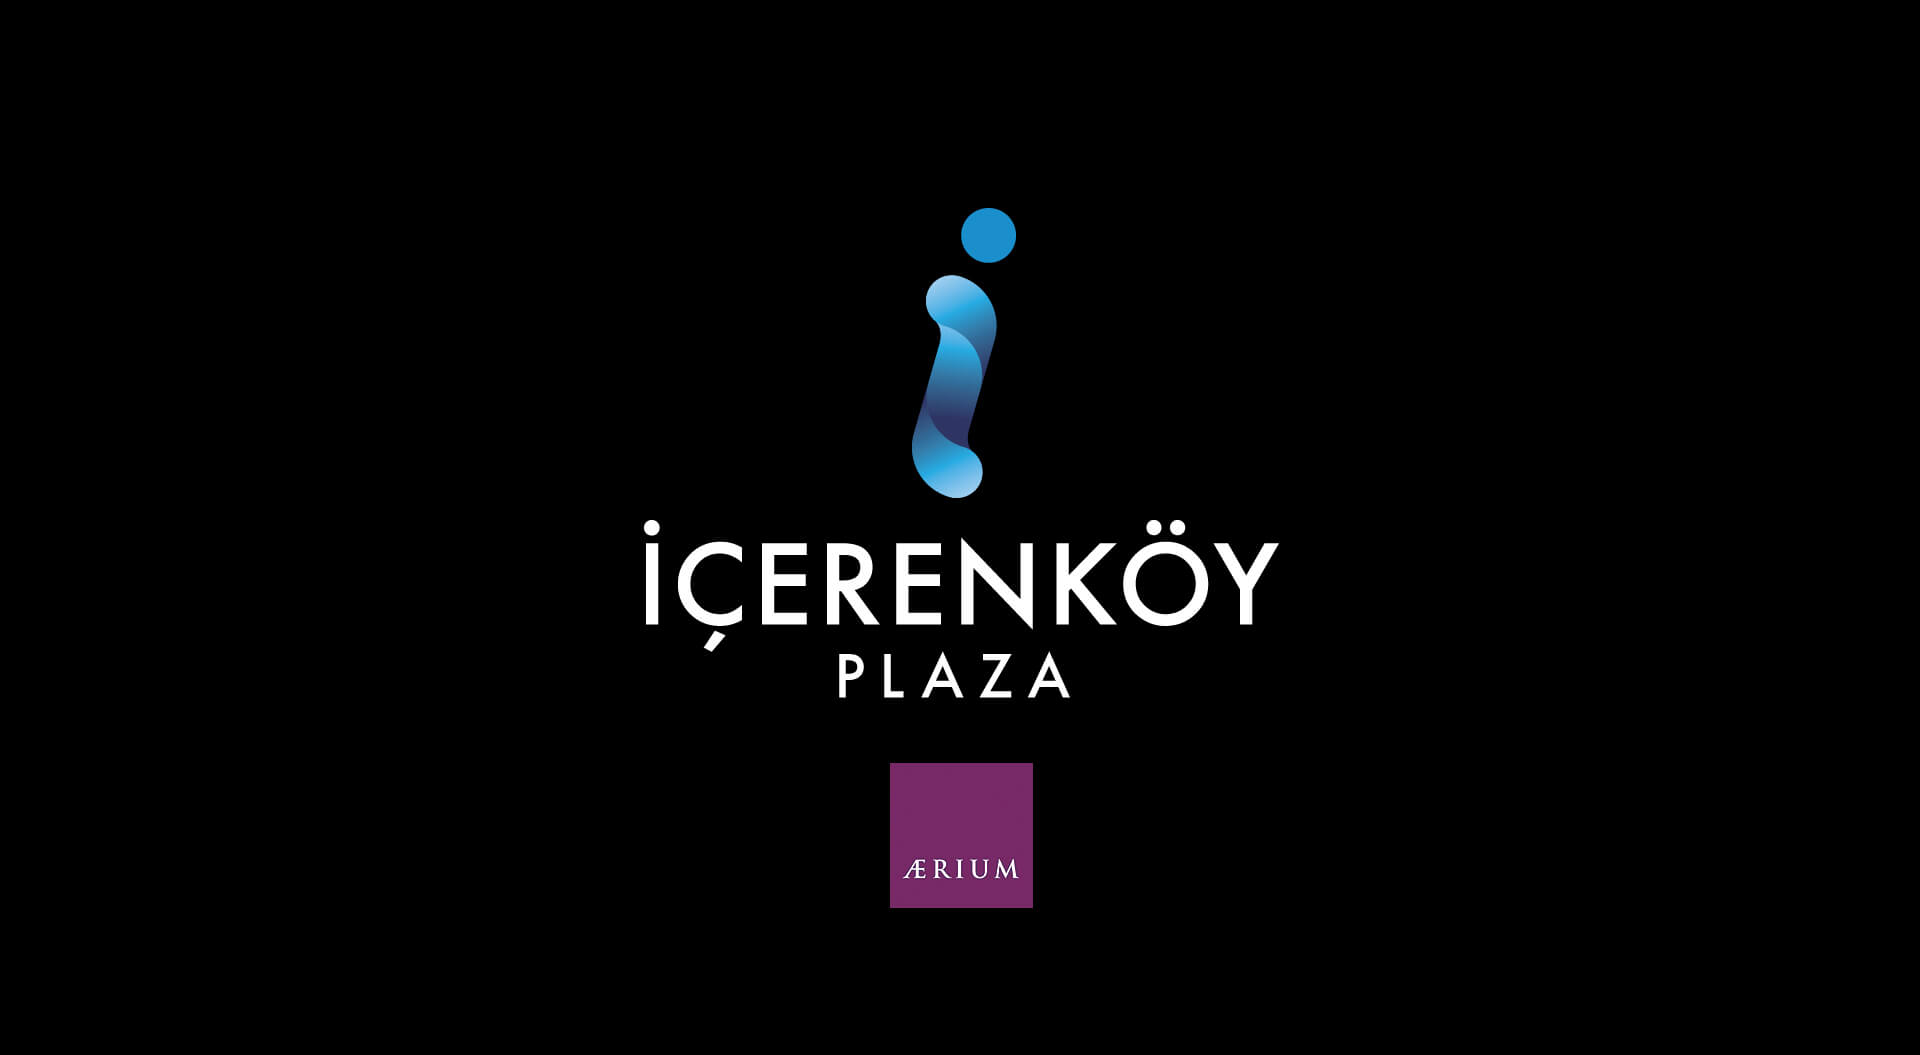 Shopping mall architecture, branding, format planning, interior design, food court restaurants, fashion stores, leisure and entertainment facilities - Icerenkoy Istanbul